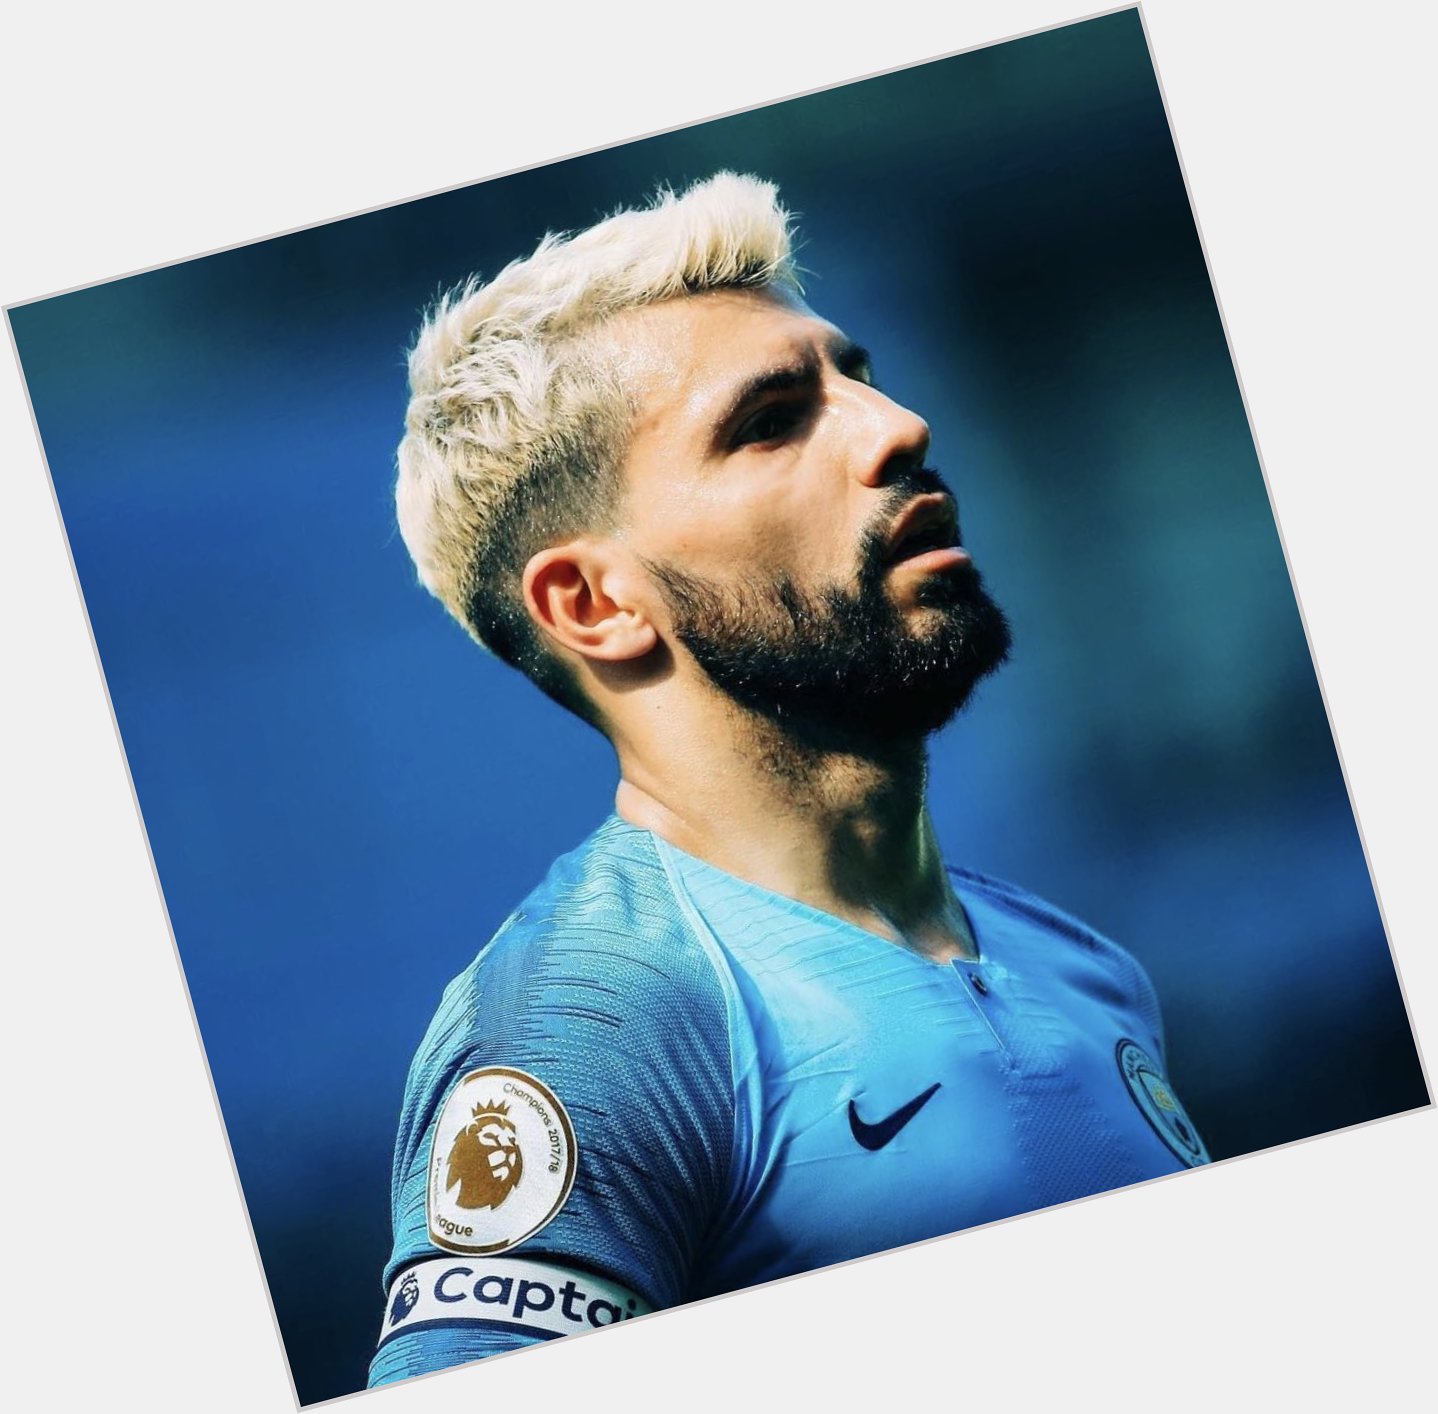 Happy birthday to the one and only, Sergio Aguero! 